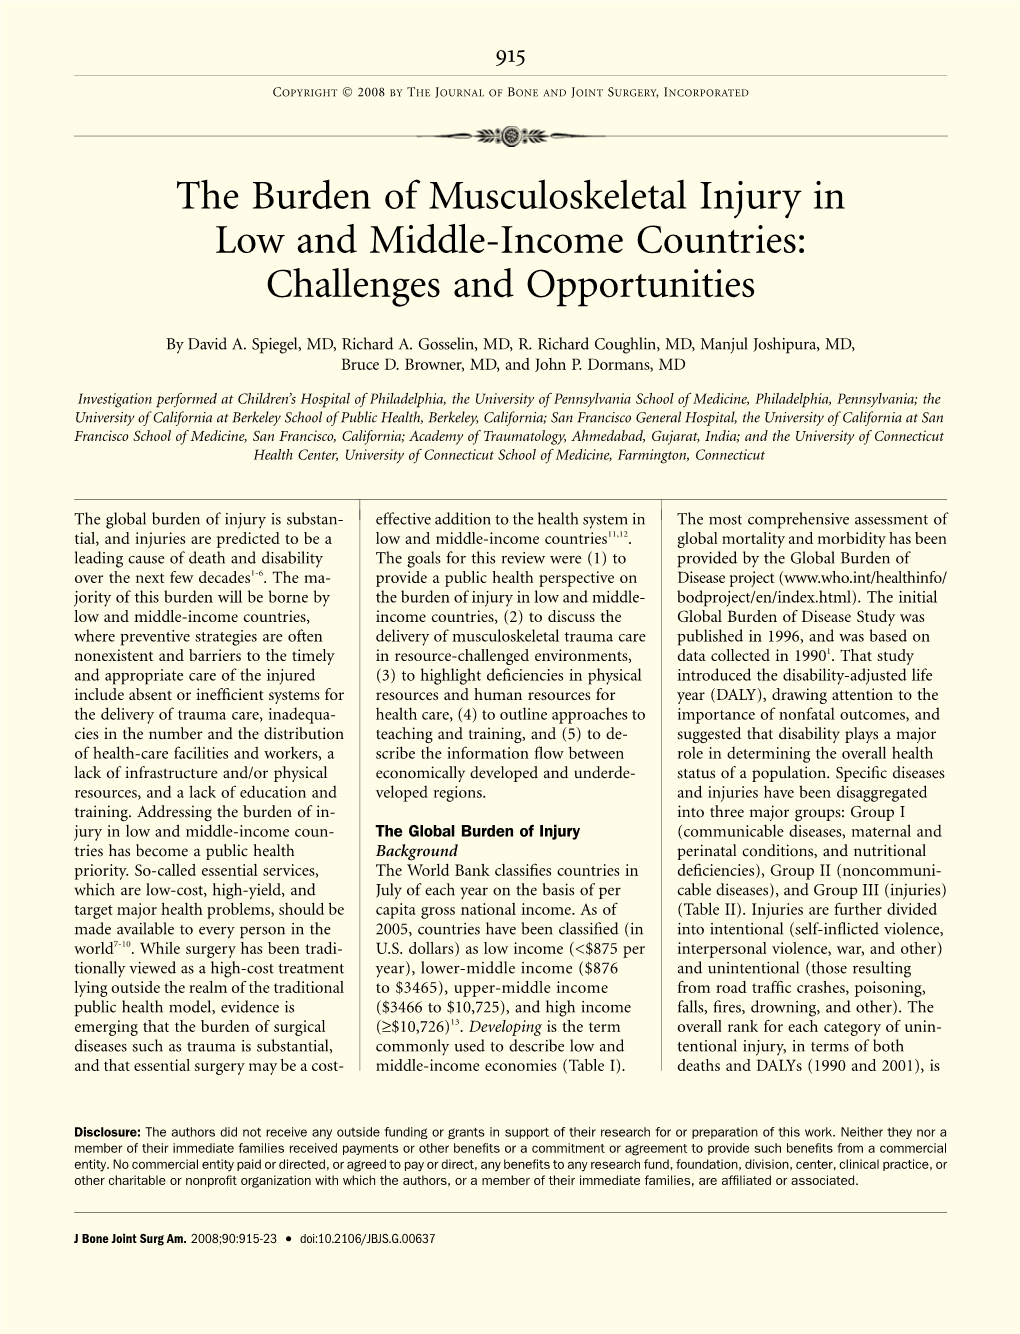 The Burden of Musculoskeletal Injury in Low and Middle-Income Countries: Challenges and Opportunities